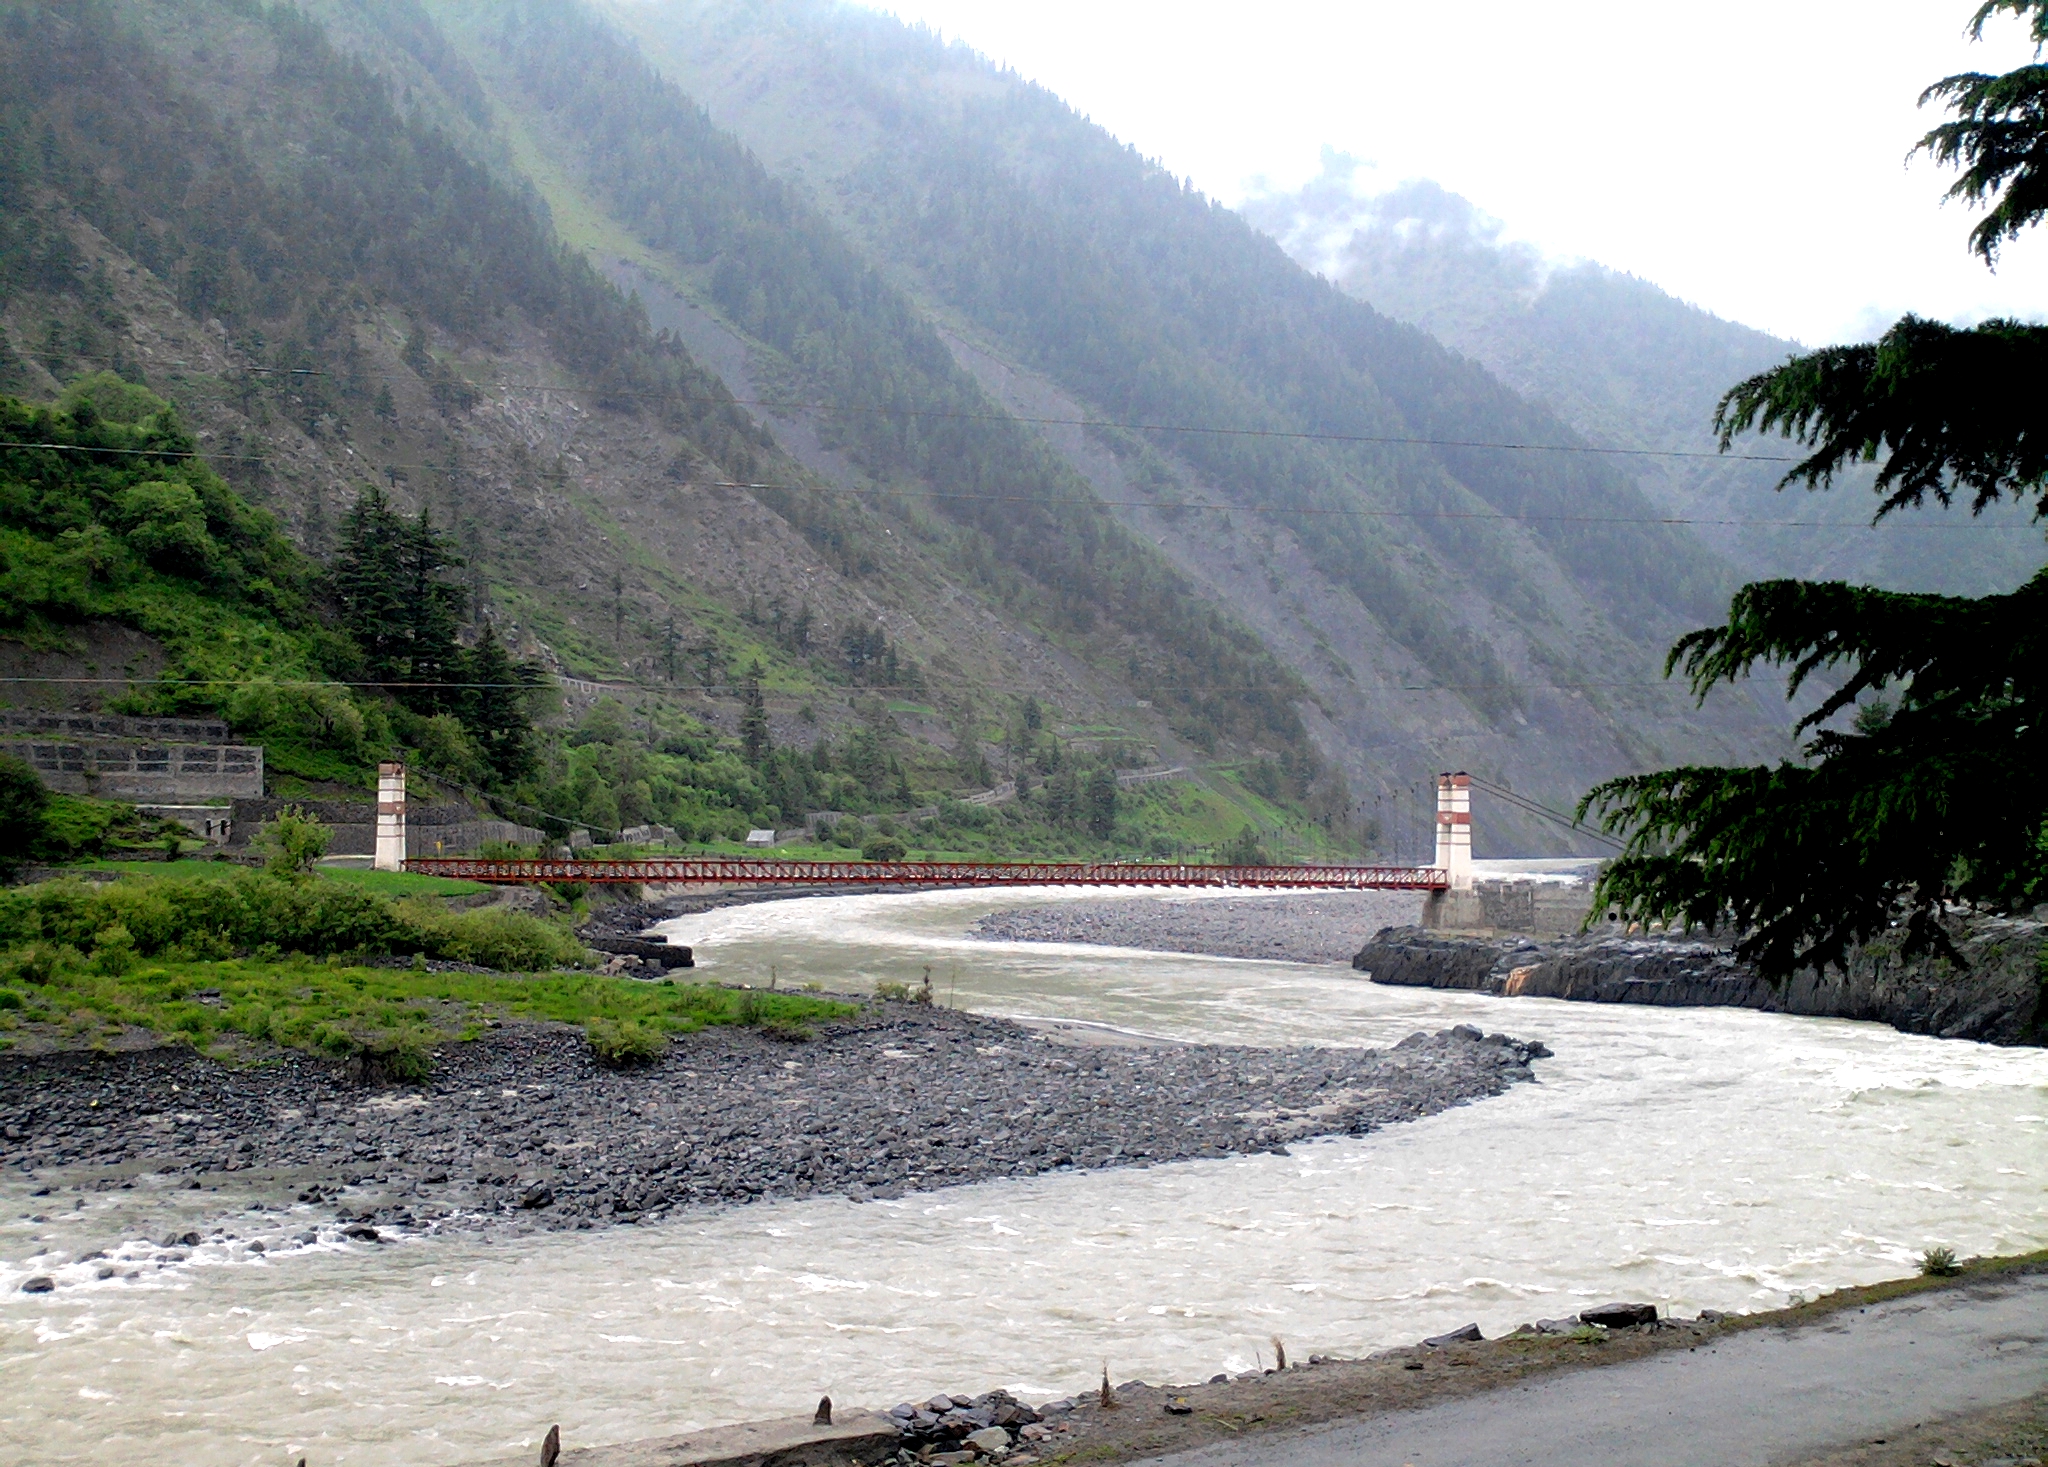 Bridge on the Chandra river to be submerged by the Seli HEP Date : 06/06/2012